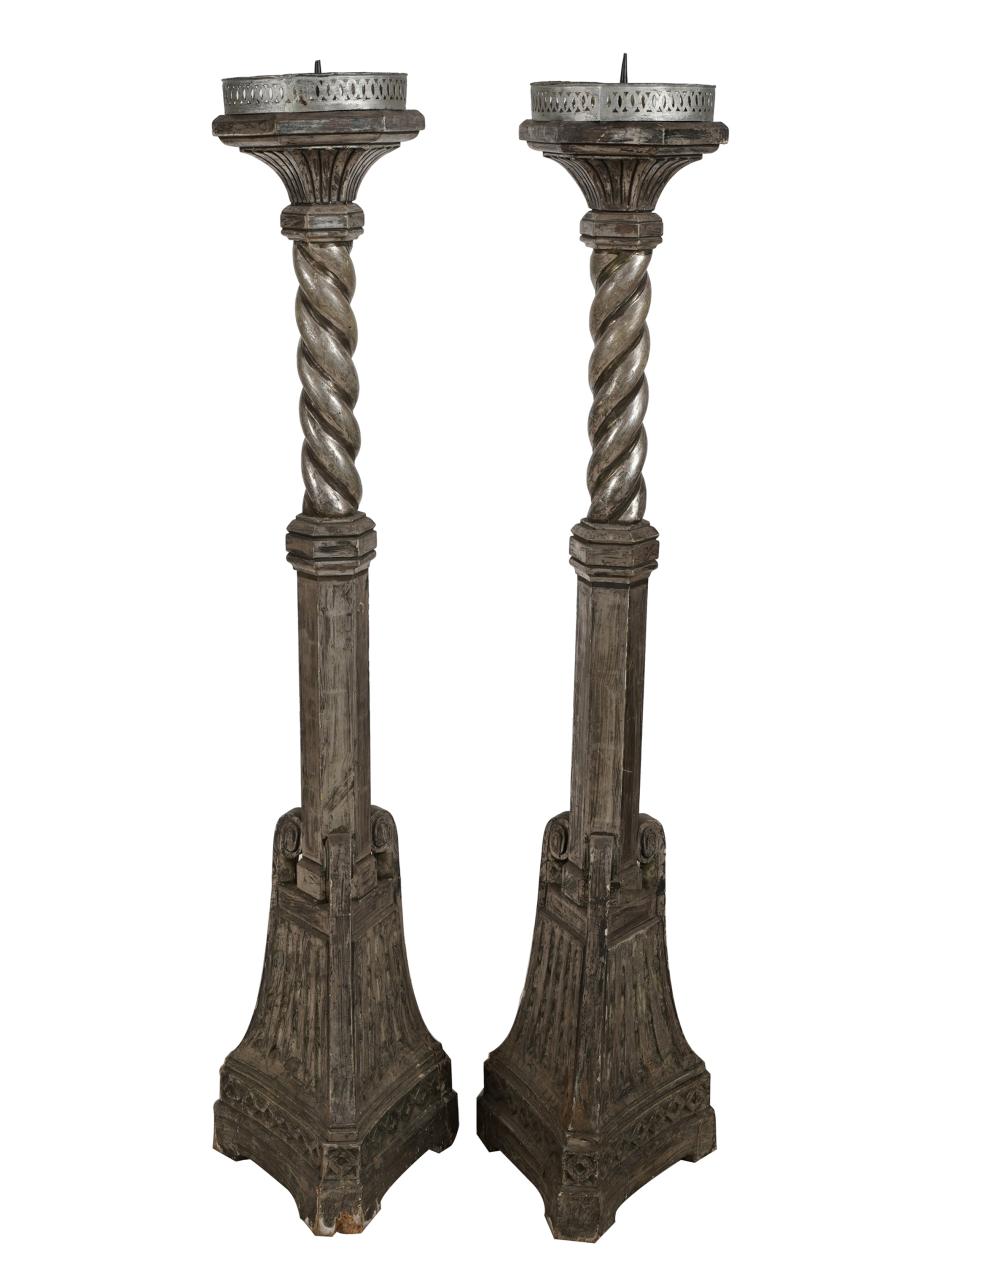 PAIR OF SILVERED WOOD PRICKET STICKSWith